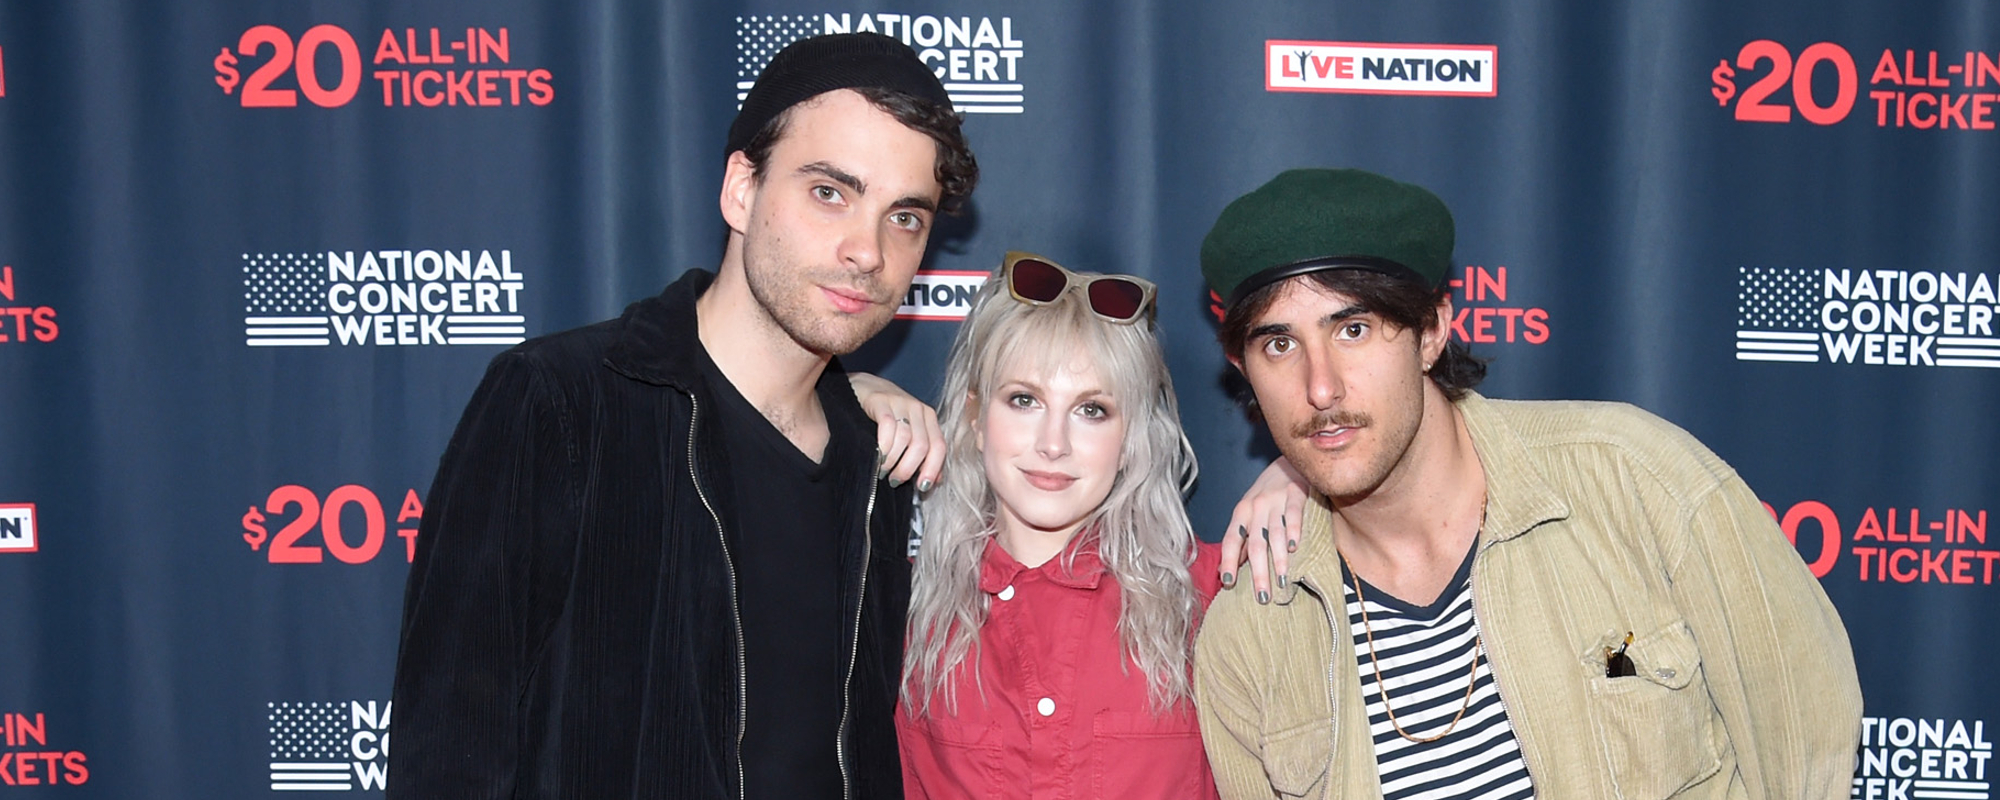 Buzz of Paramore’s Breakup Mounts as Band Drops Out of Headlining Festival Performance, Releases Instagram Statement